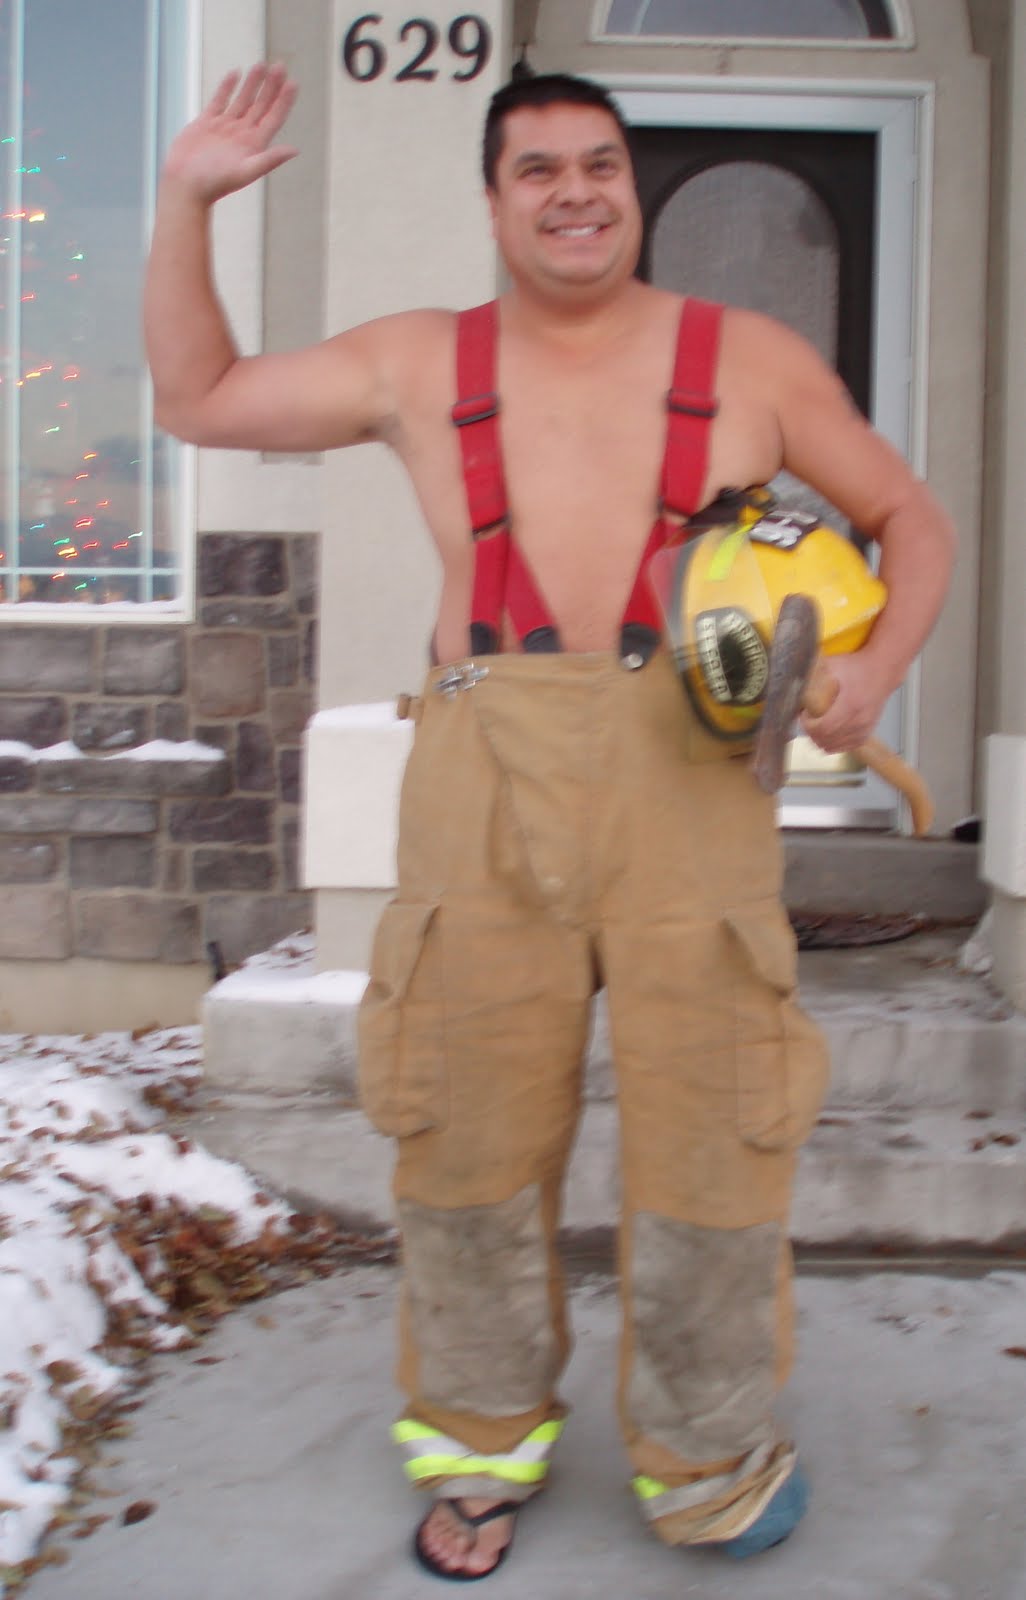 wave-at-the-bus-day-64-firefighter-calendar-hunk